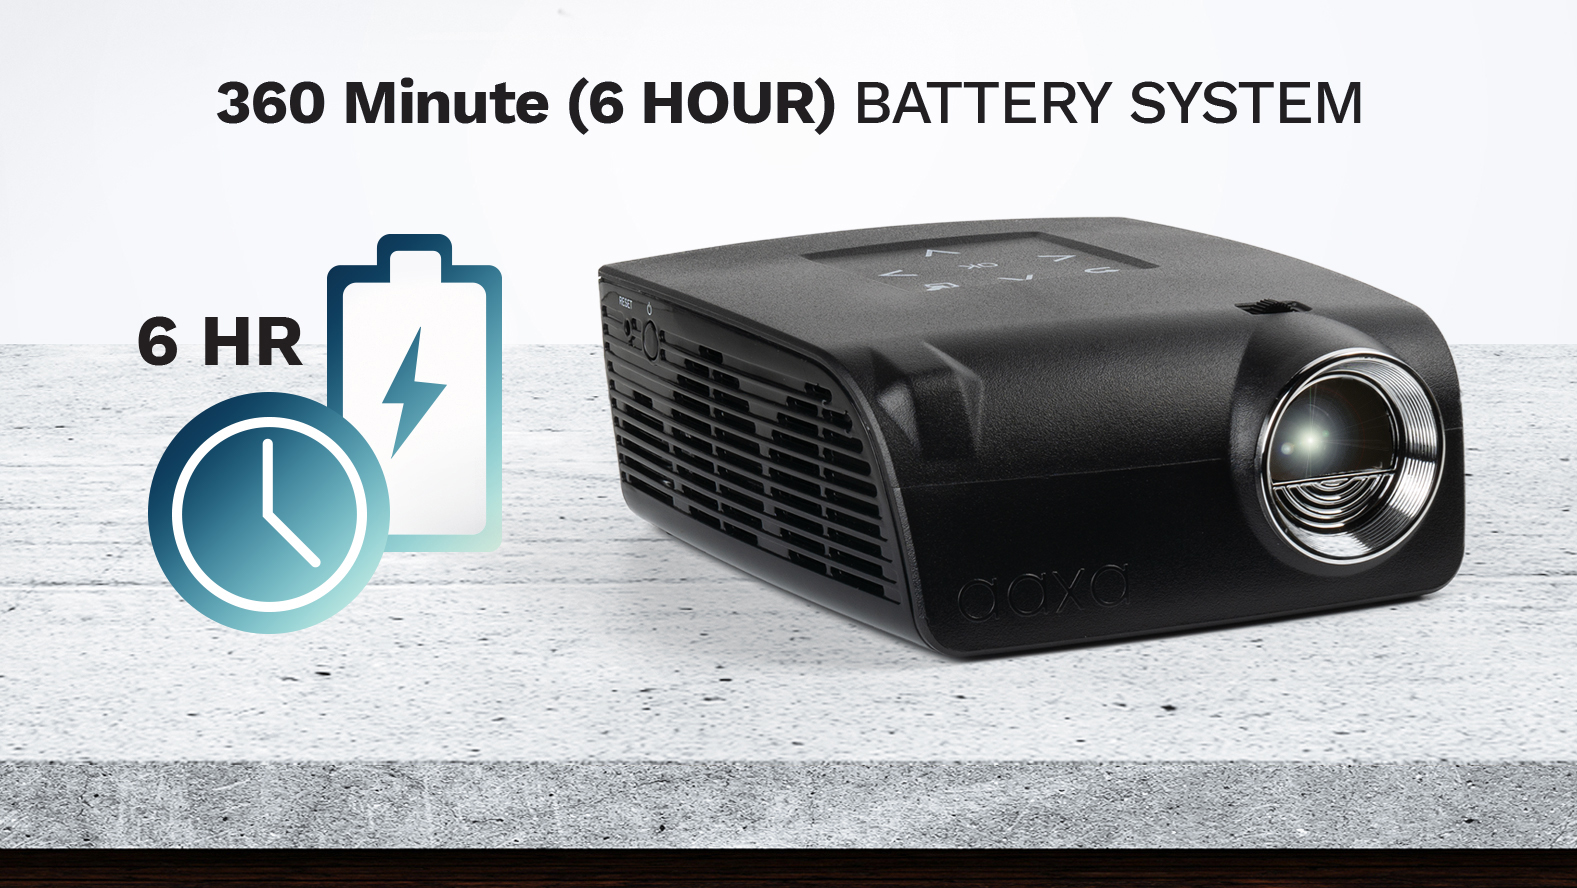 360 Minute / 6 Hour Battery System – Long lasting battery for portable use.